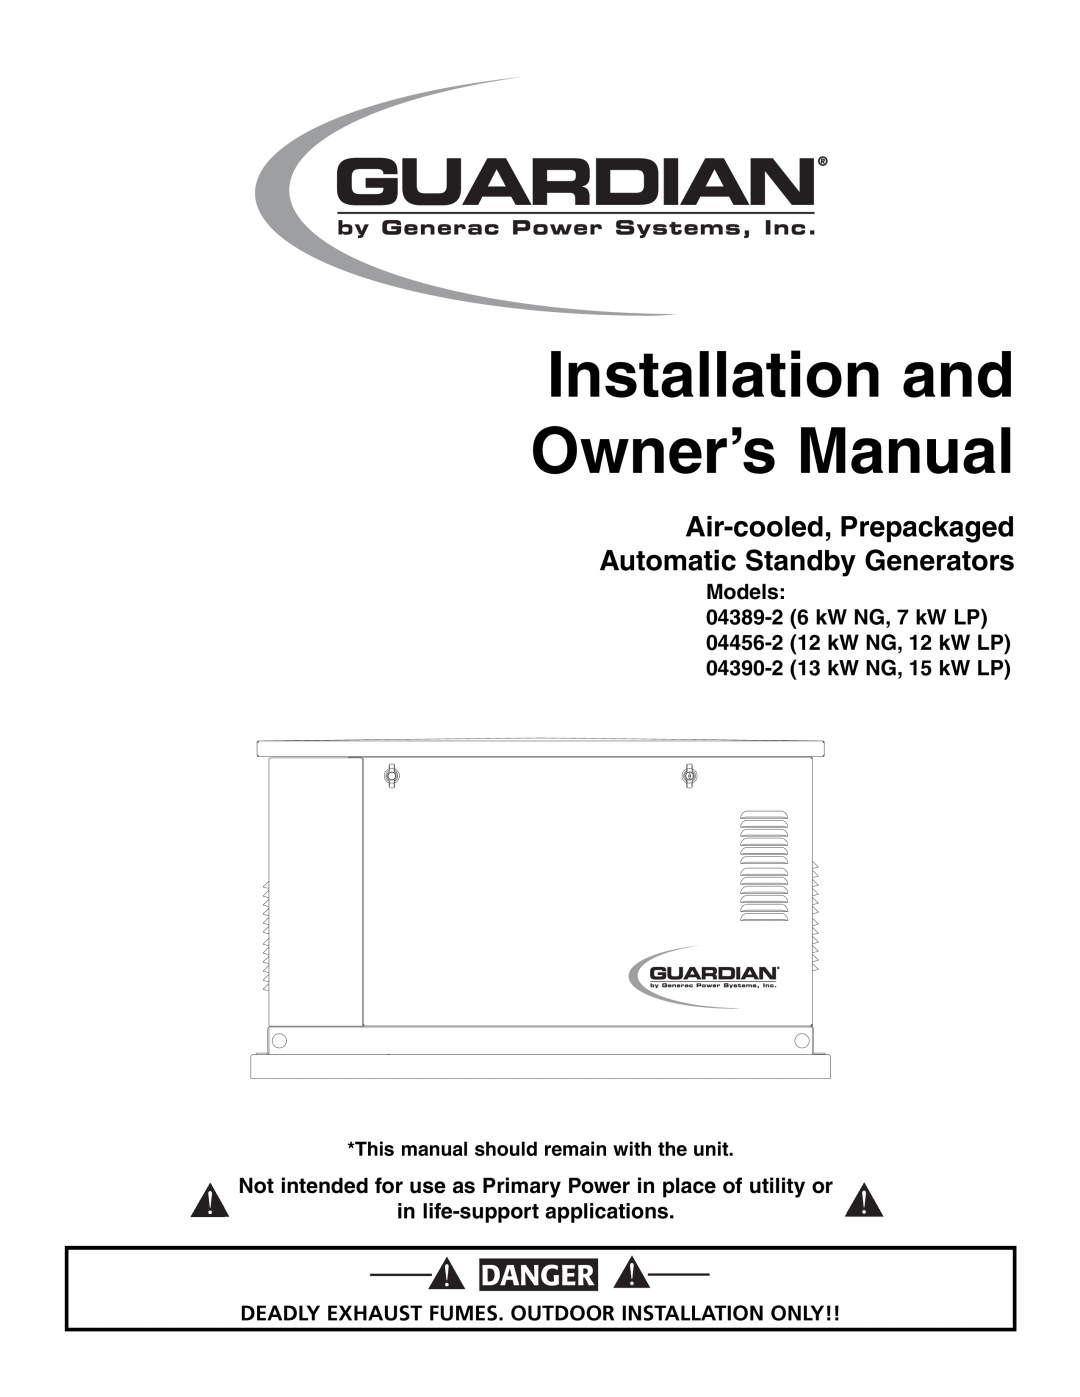 Guardian Technologies 04456-2, 04389-2 owner manual Deadly Exhaust Fumes. Outdoor Installation Only, Danger, Generac R 